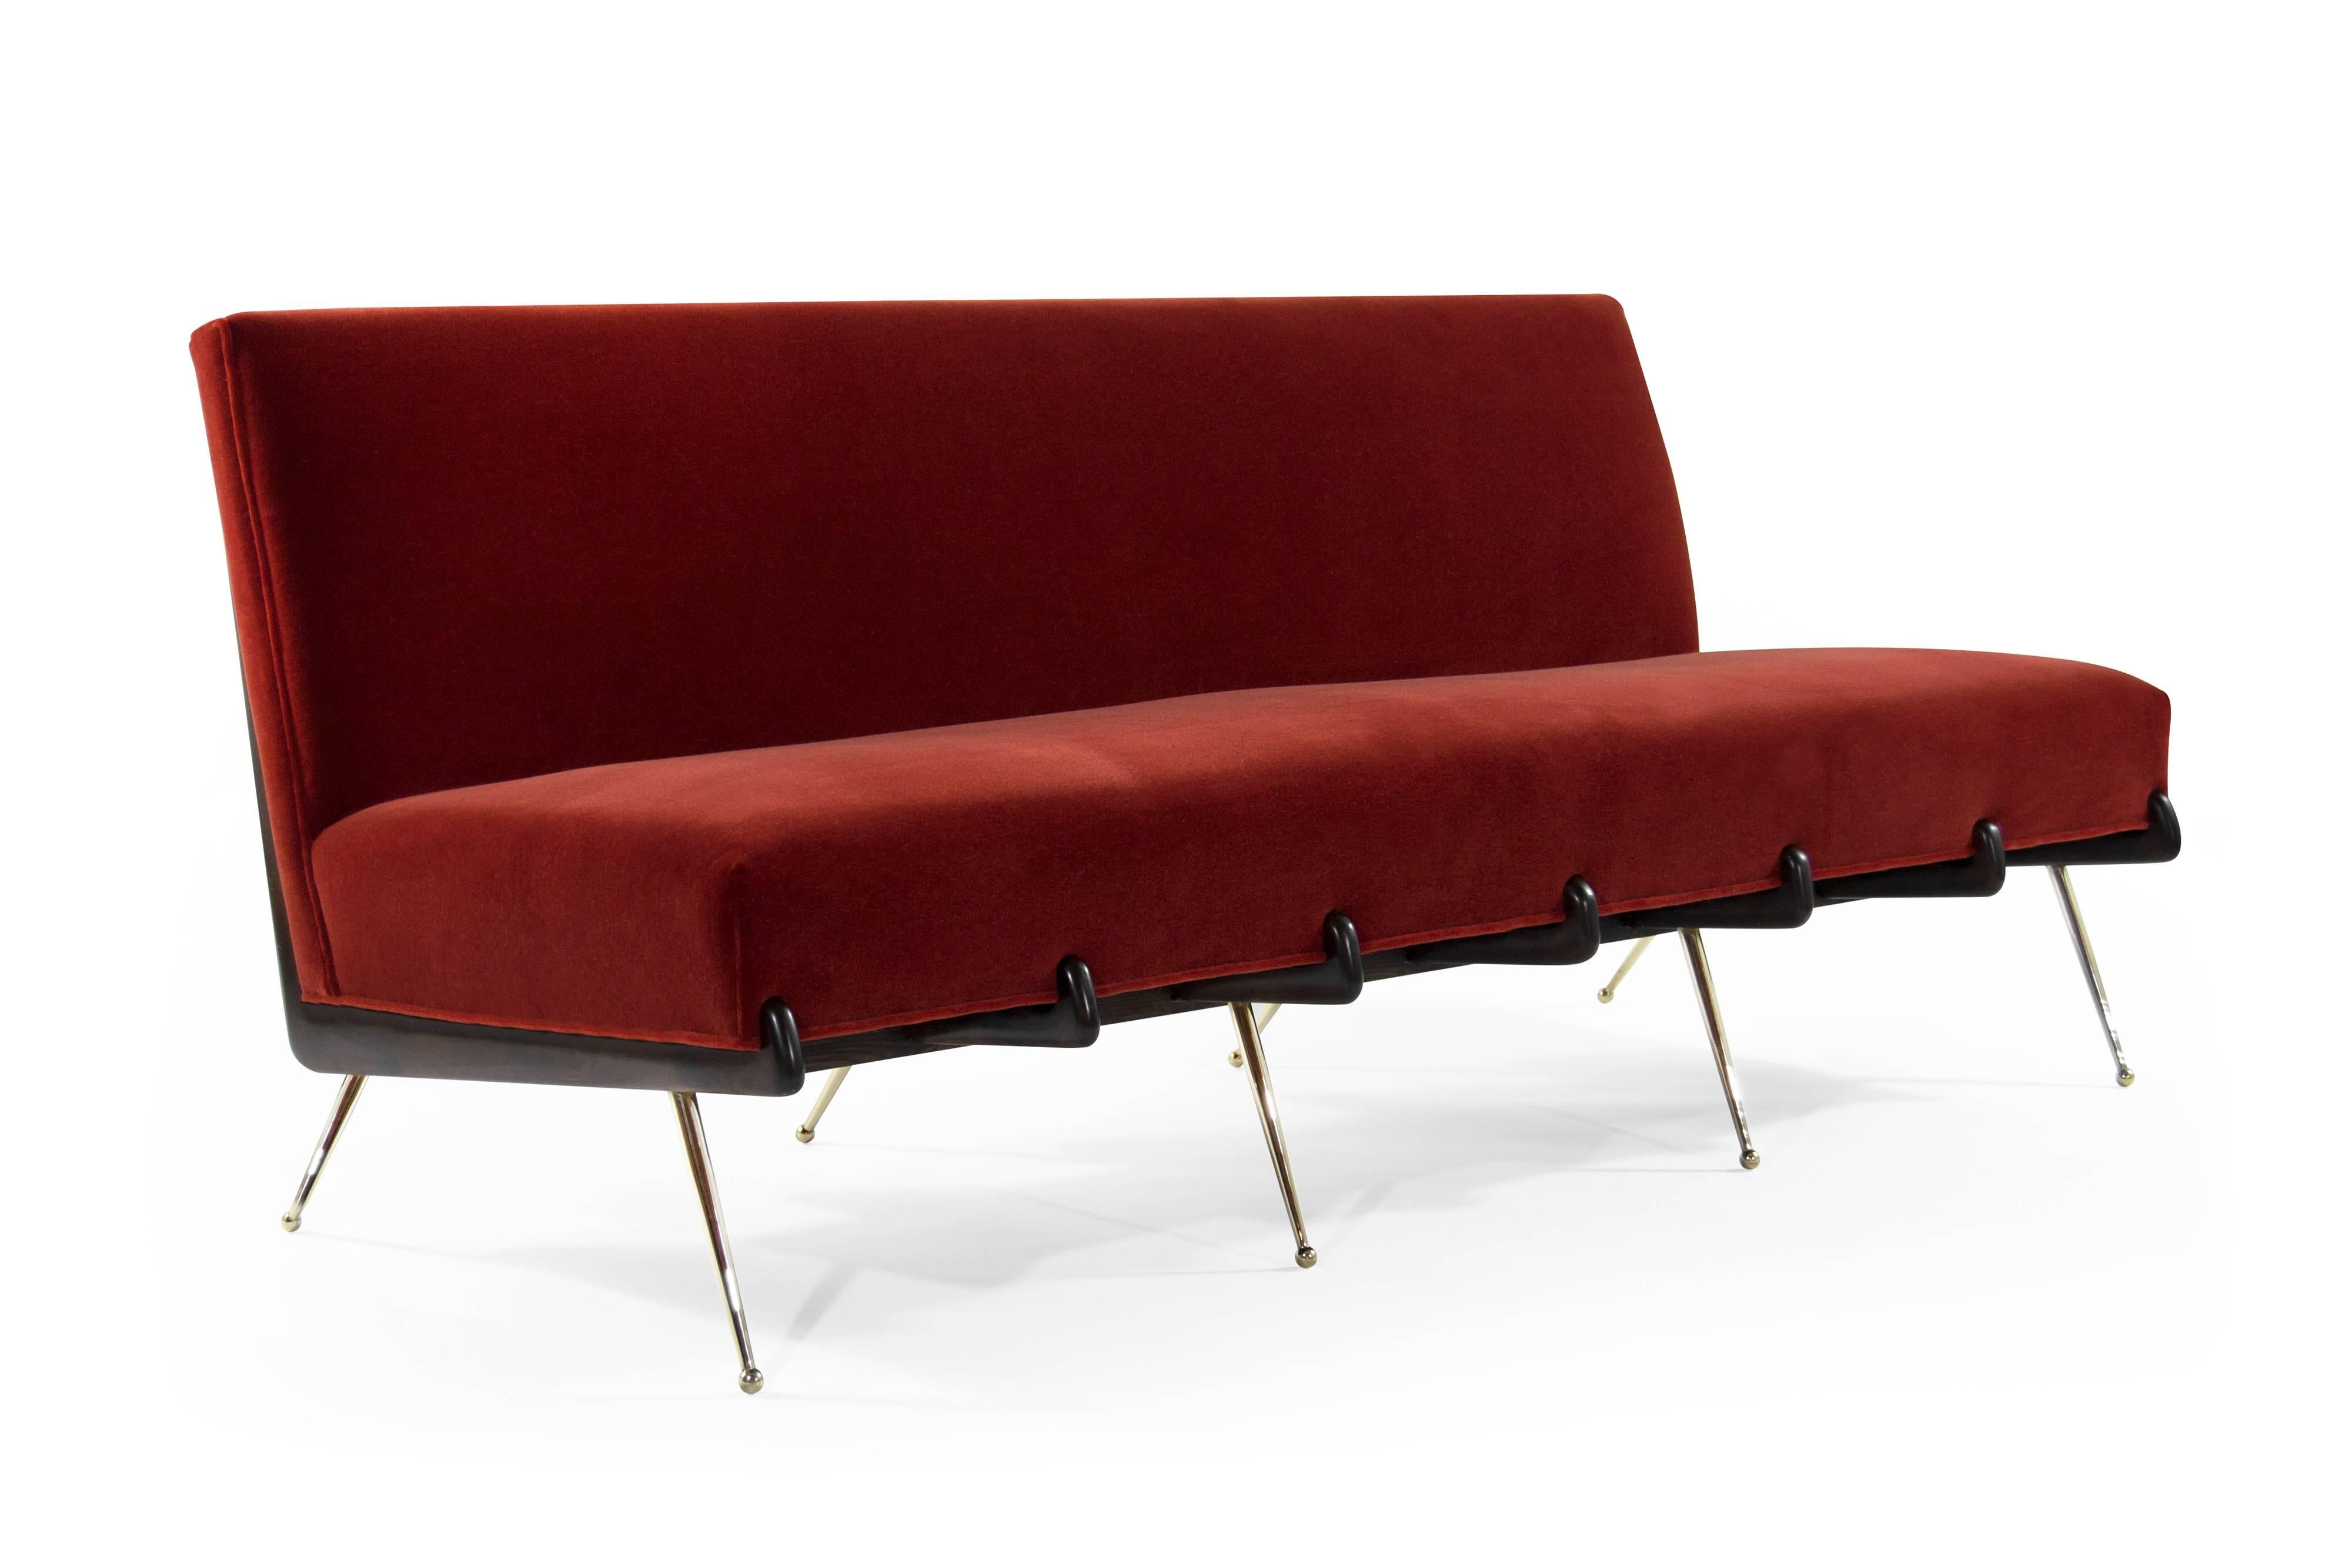 Rare sofa in the style of Italian designer Gio Ponti, circa 1960s.

Boomerang shaped walnut frames fully restored to their original dark walnut finish, newly upholstered in rust red mohair. Thin tapered brass legs newly polished. 